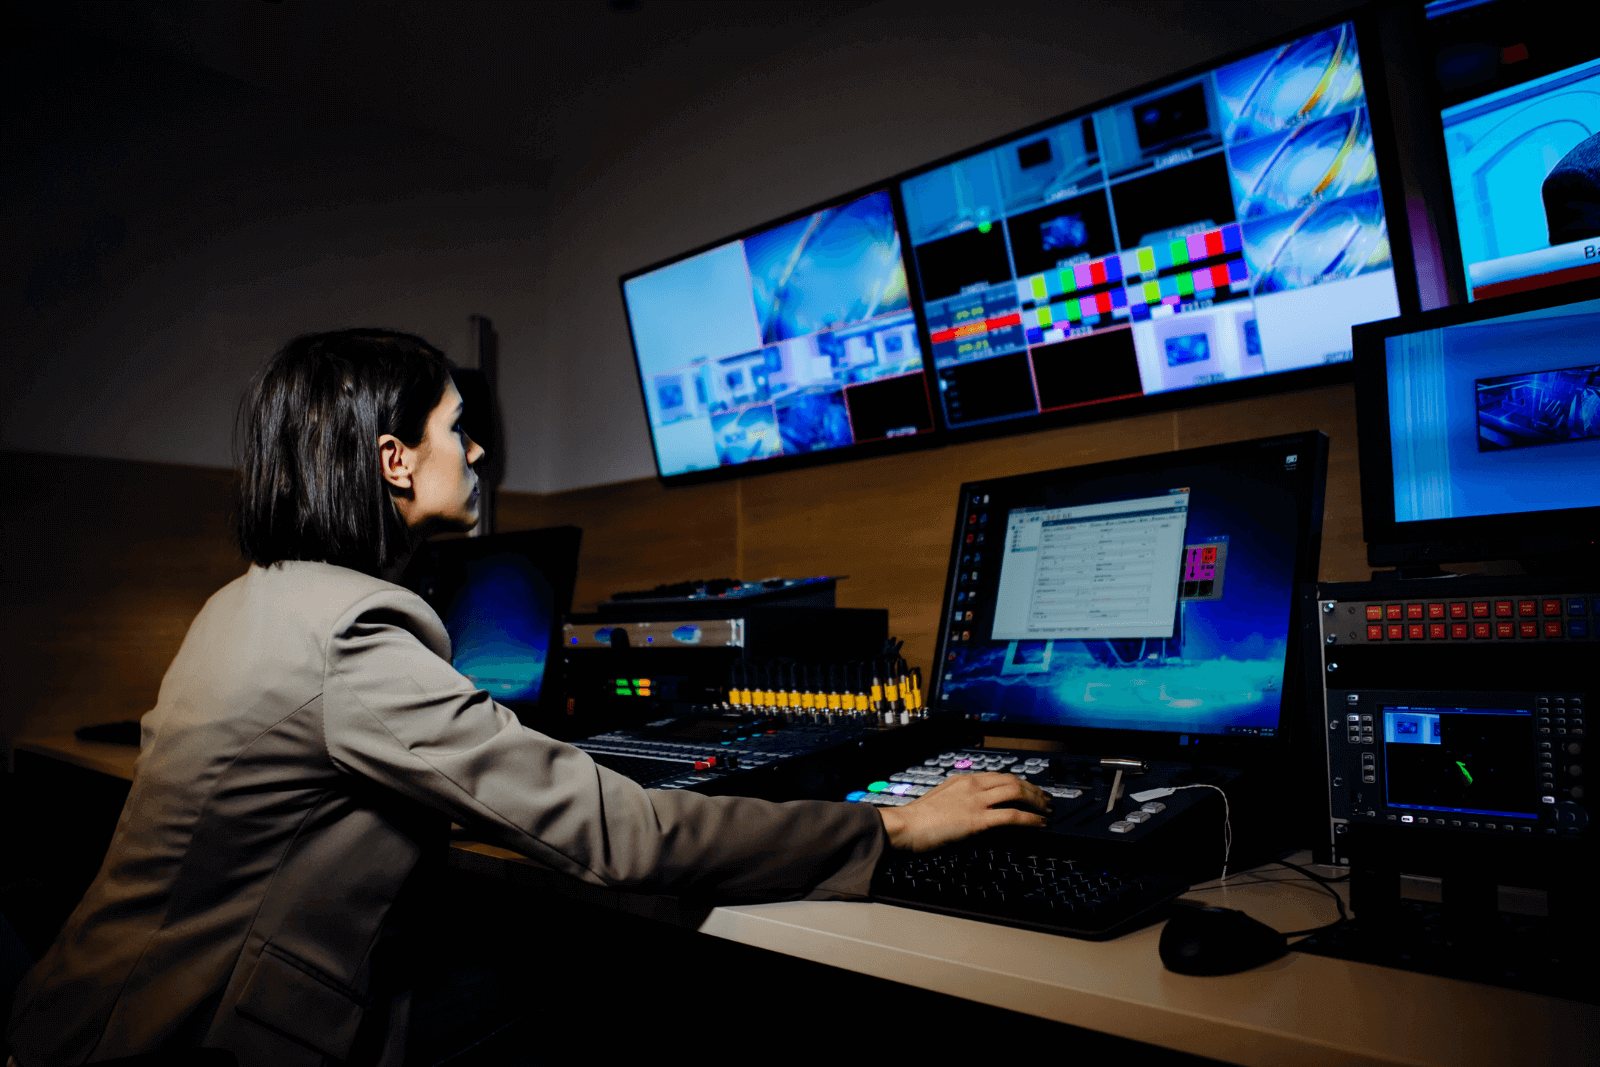 Dynamically connect broadcast production teams